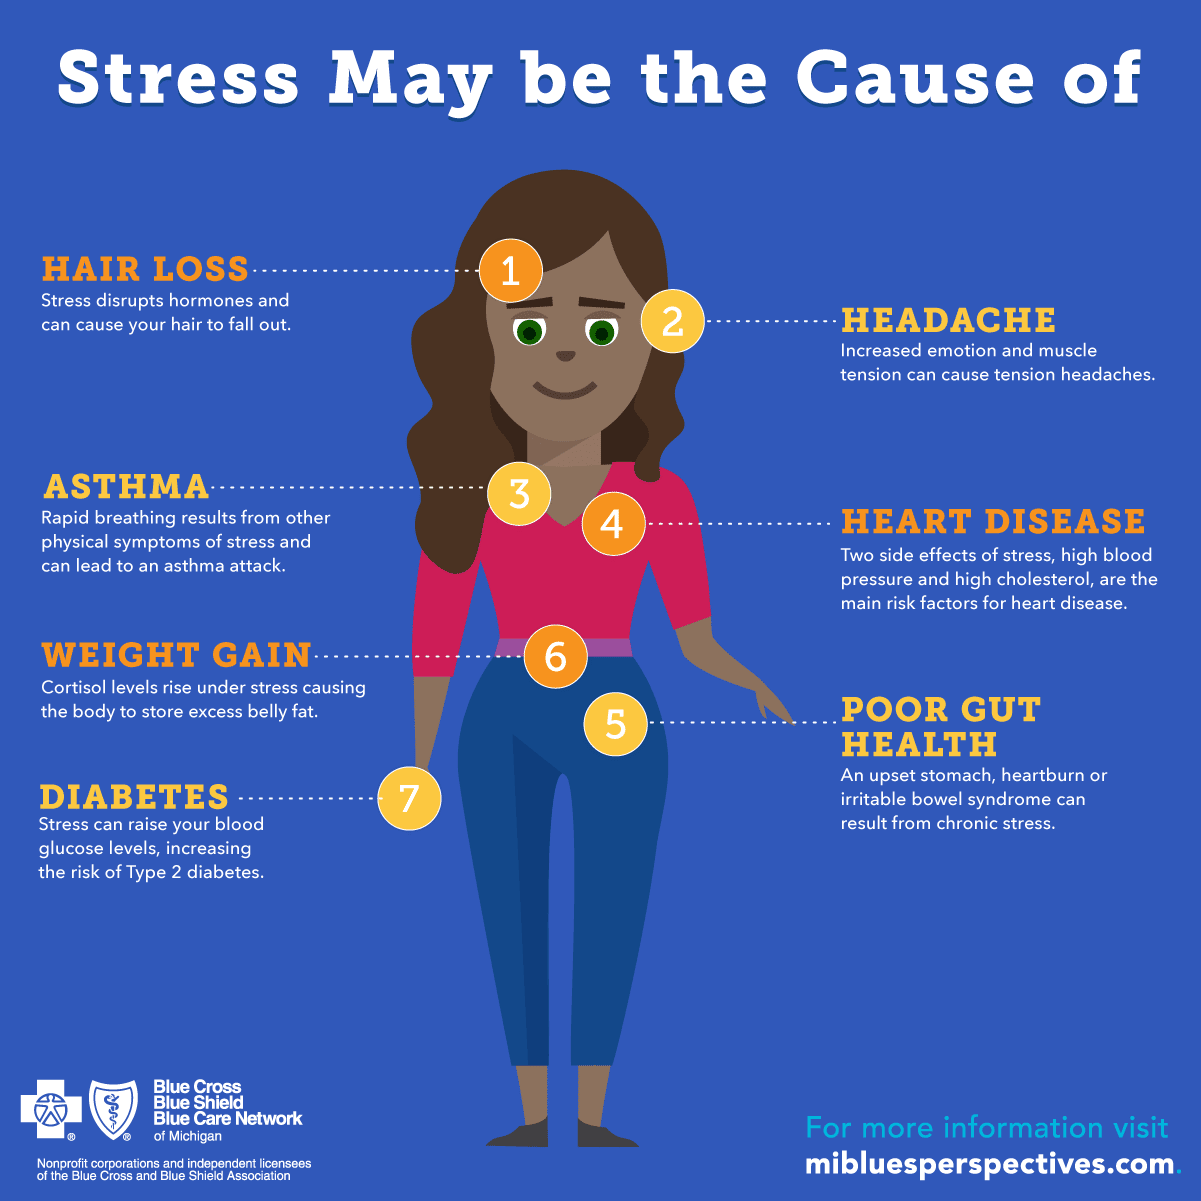 Is Your Stress Getting The Better Of You?